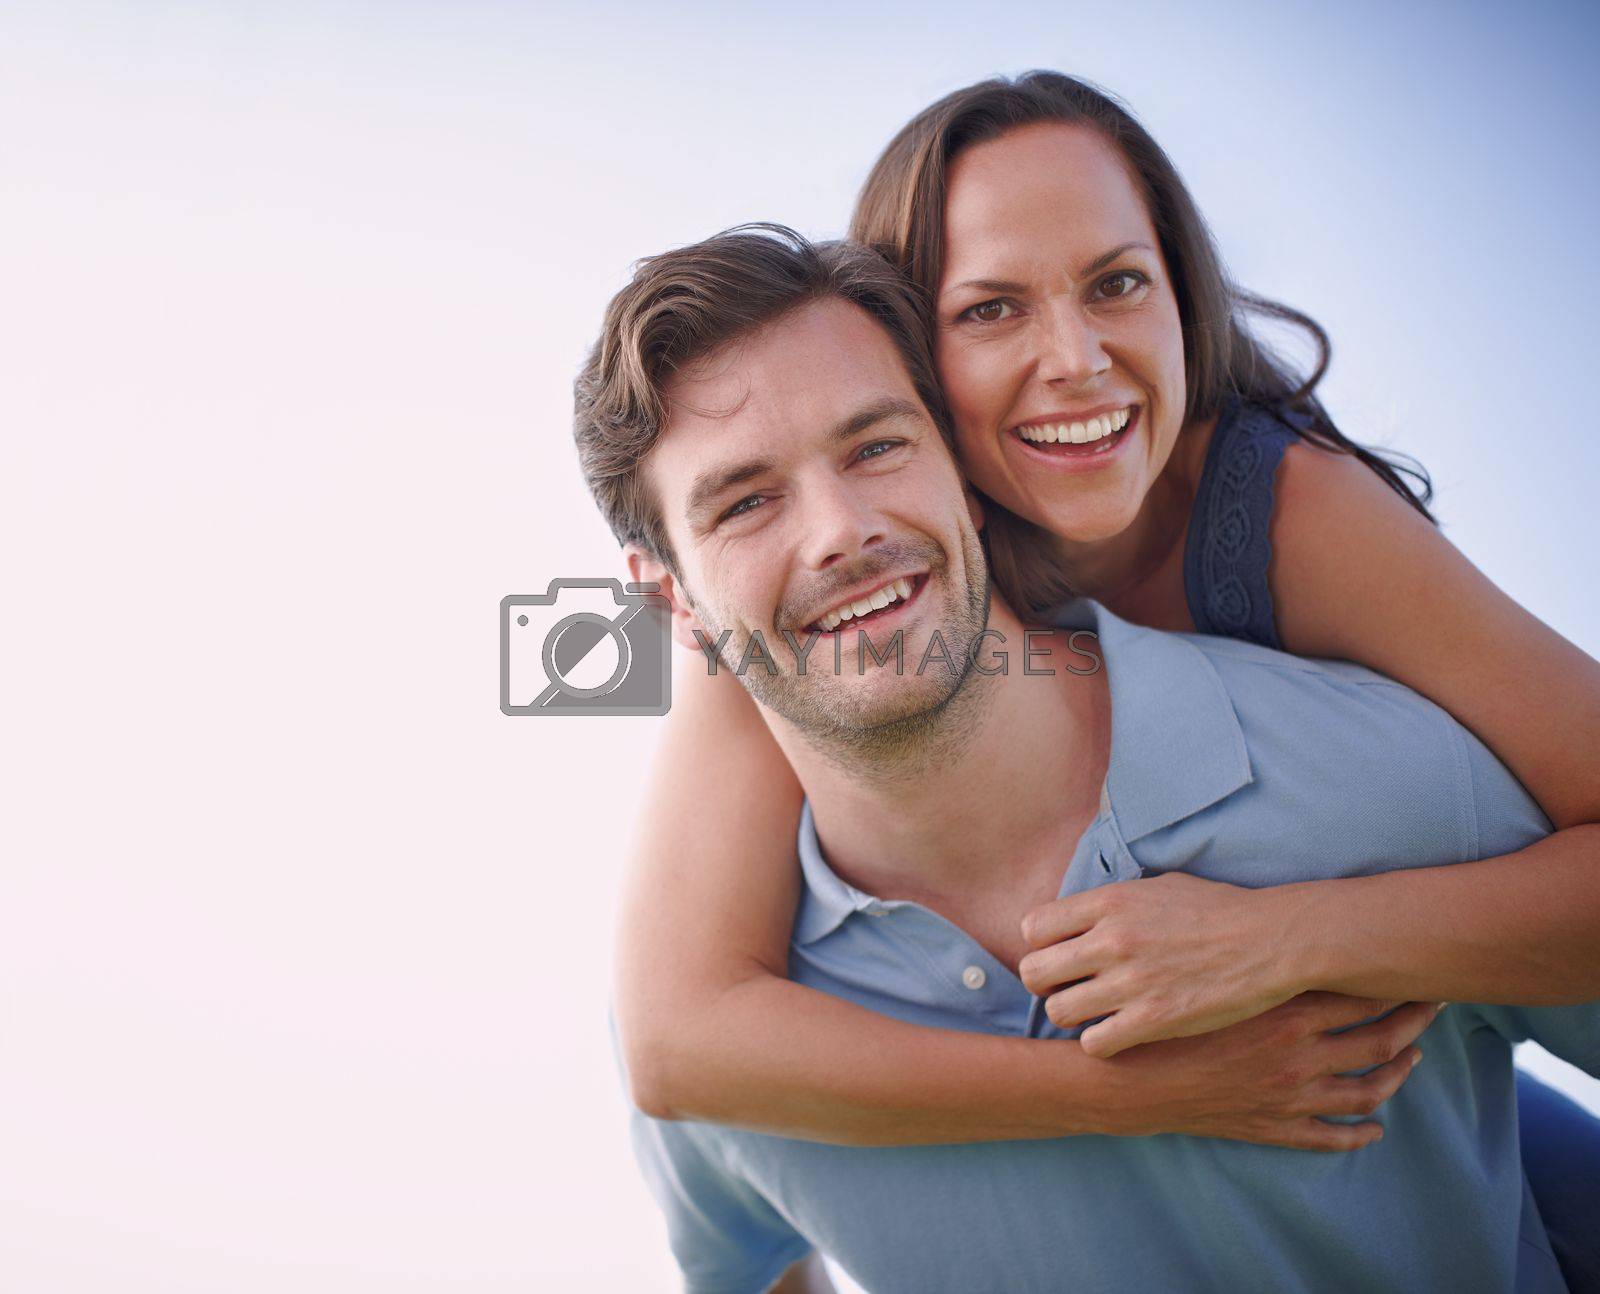 Royalty free image of Keeping the romance alive. A handsome man piggybacking his loving wife outdoors. by YuriArcurs